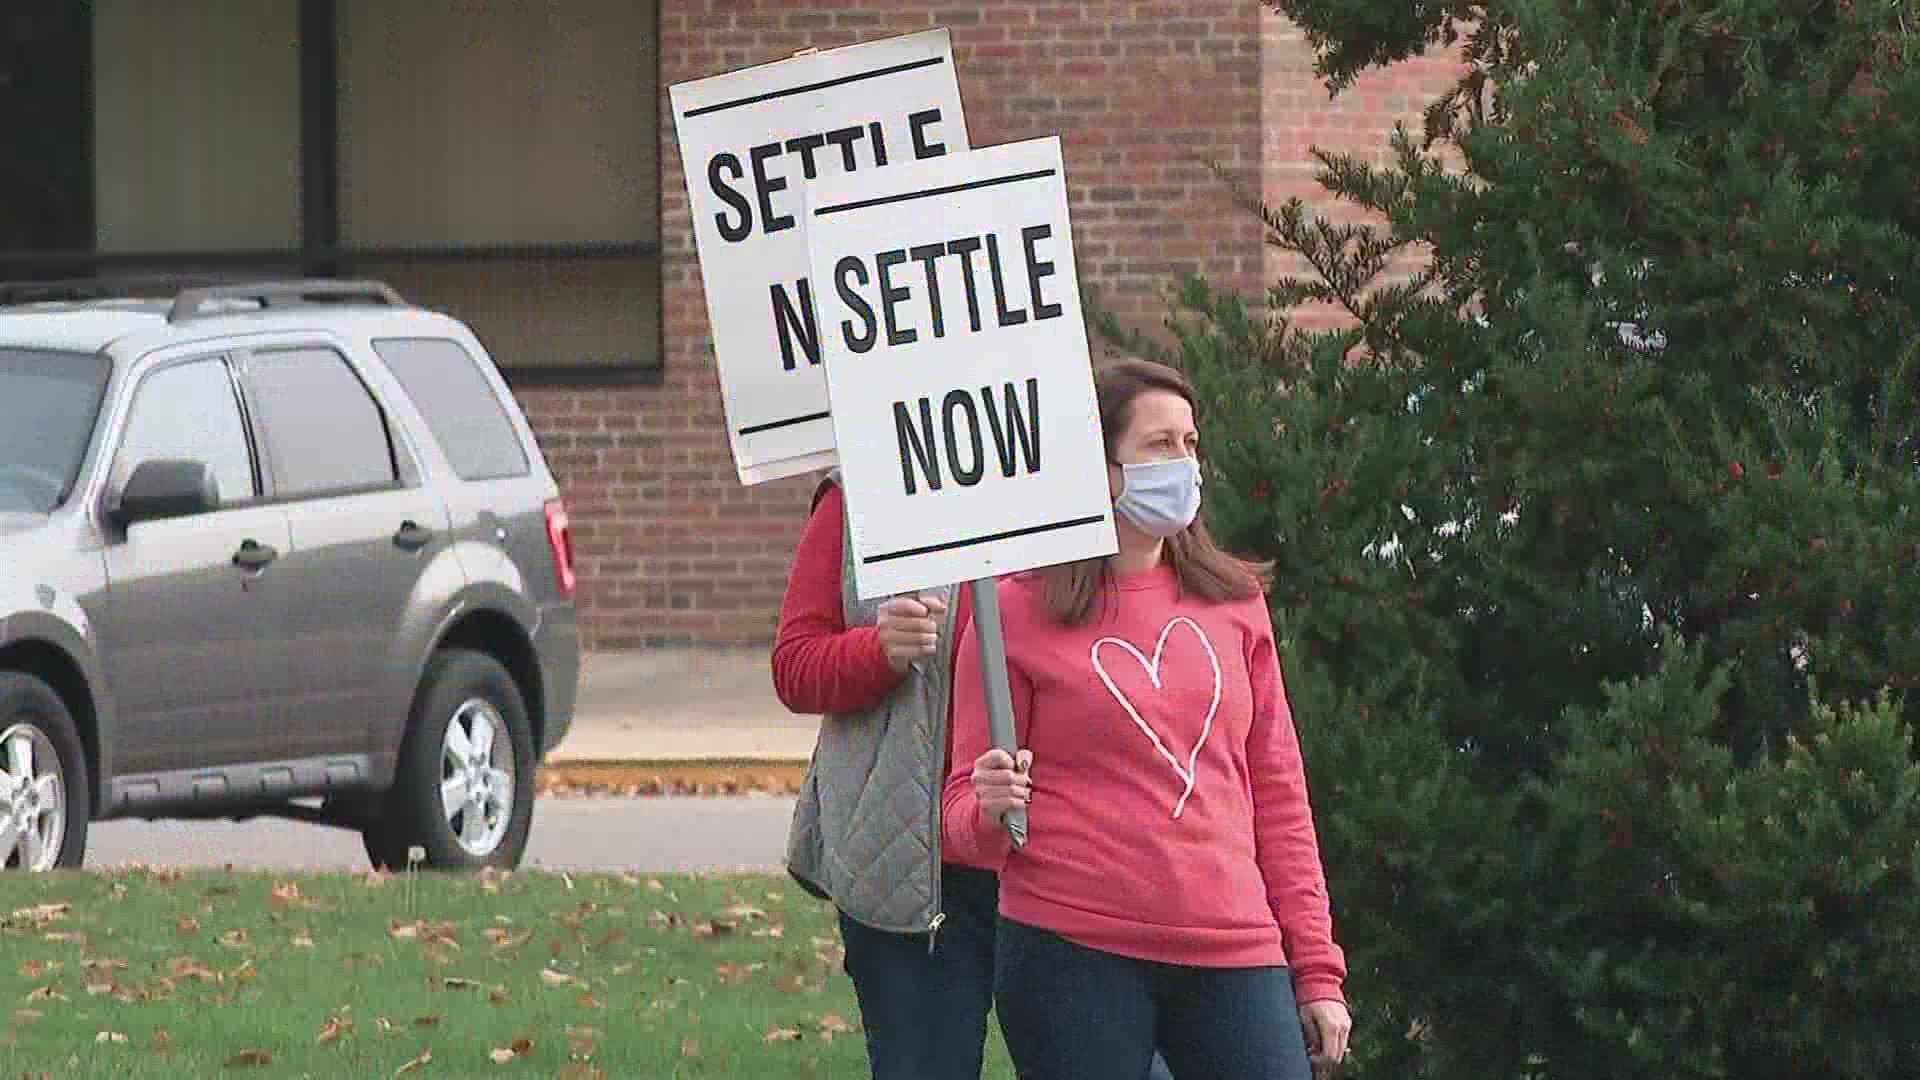 Teachers are still on the picket line and students joined them Wednesday to share their concerns.